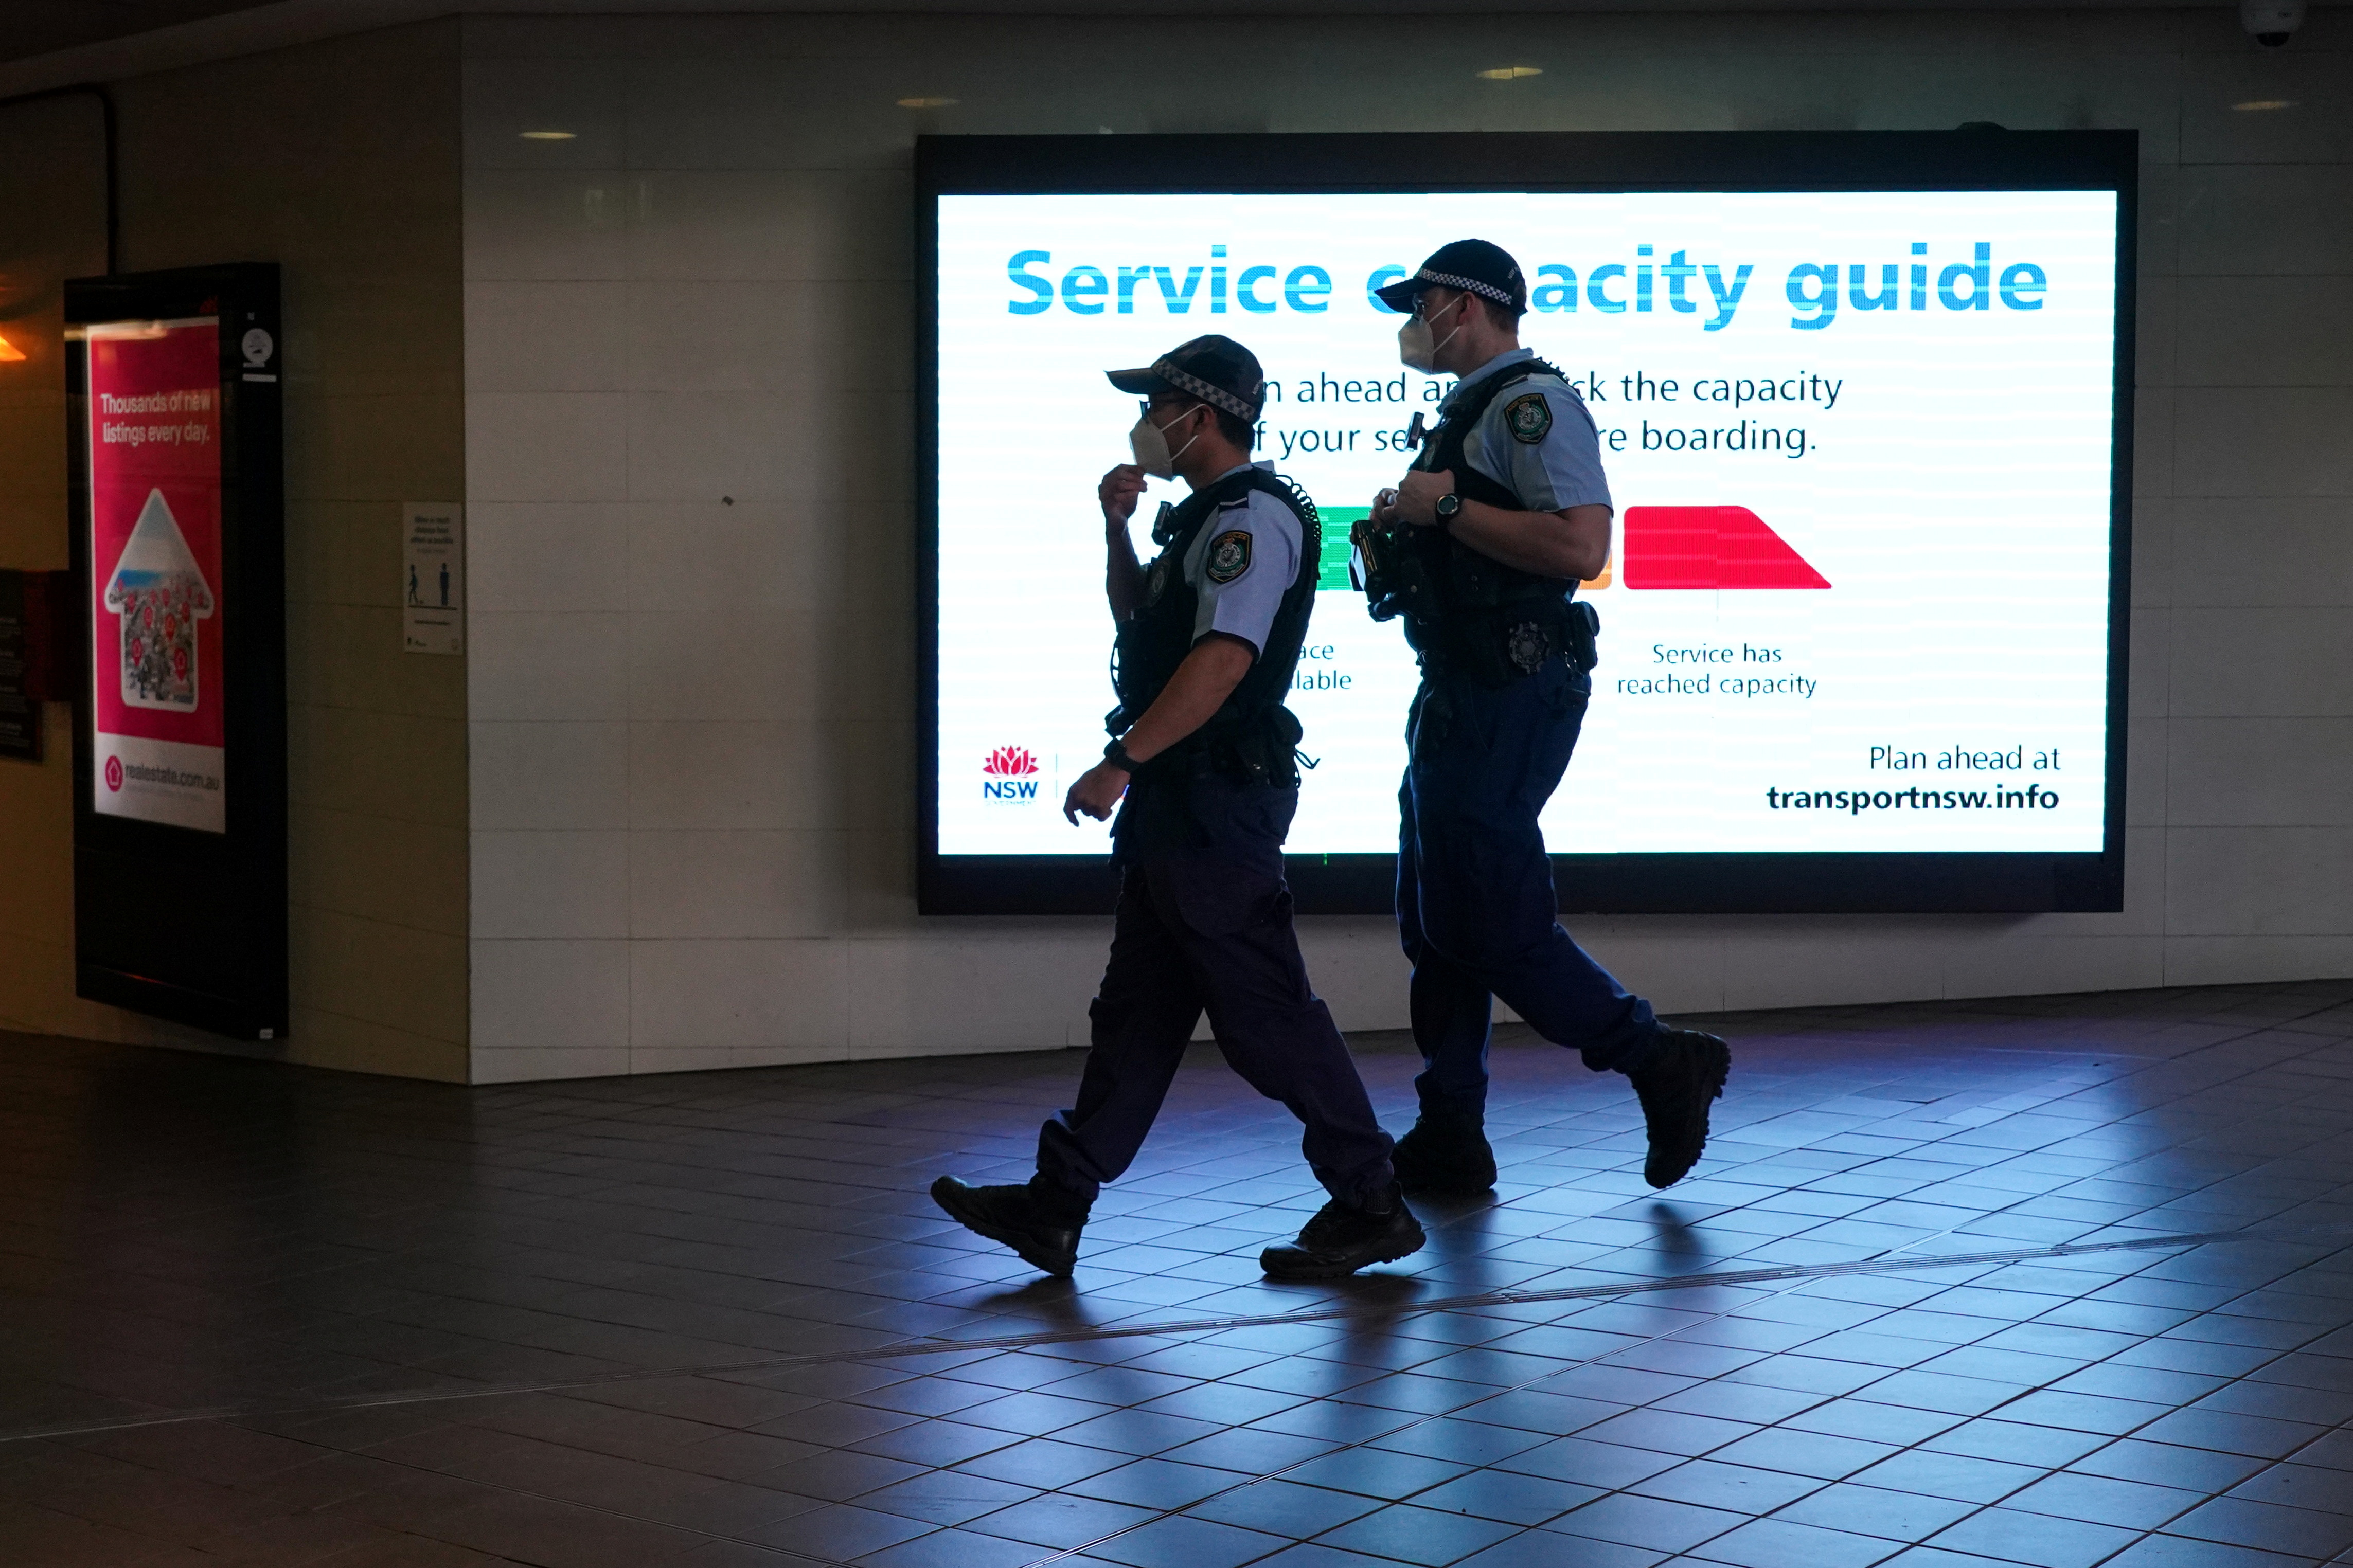 Police officers in protective face masks patrol a public transit station in the city centre during a lockdown to curb the spread of a coronavirus disease (COVID-19) in Sydney, Australia, September 30, 2021. REUTERS/Loren Elliott